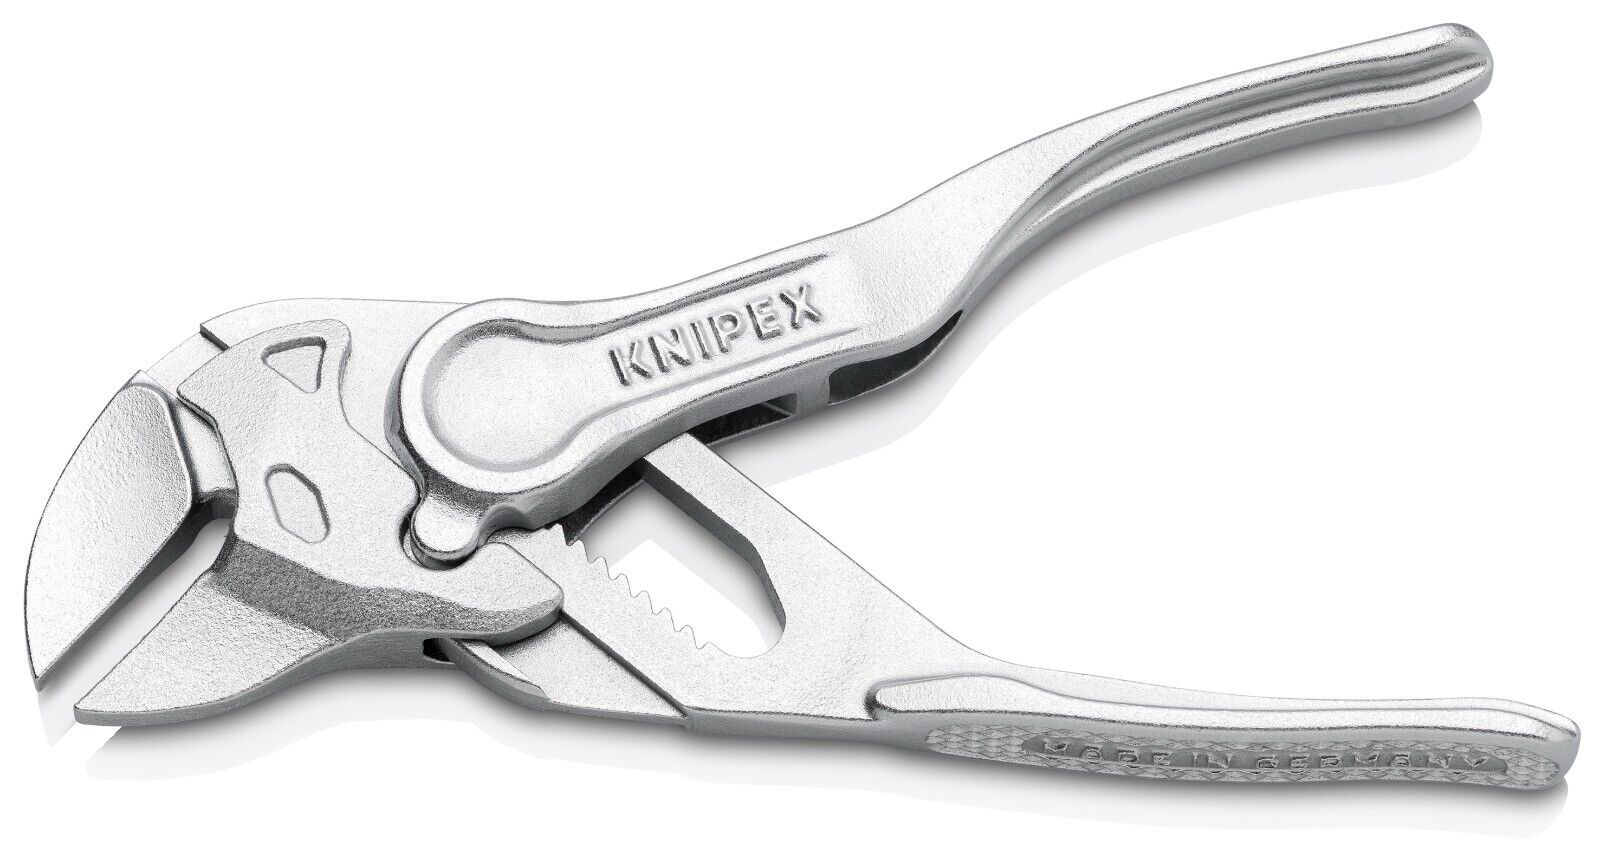 Knipex Cobra XS Mini Pliers Are Tiny but Mighty